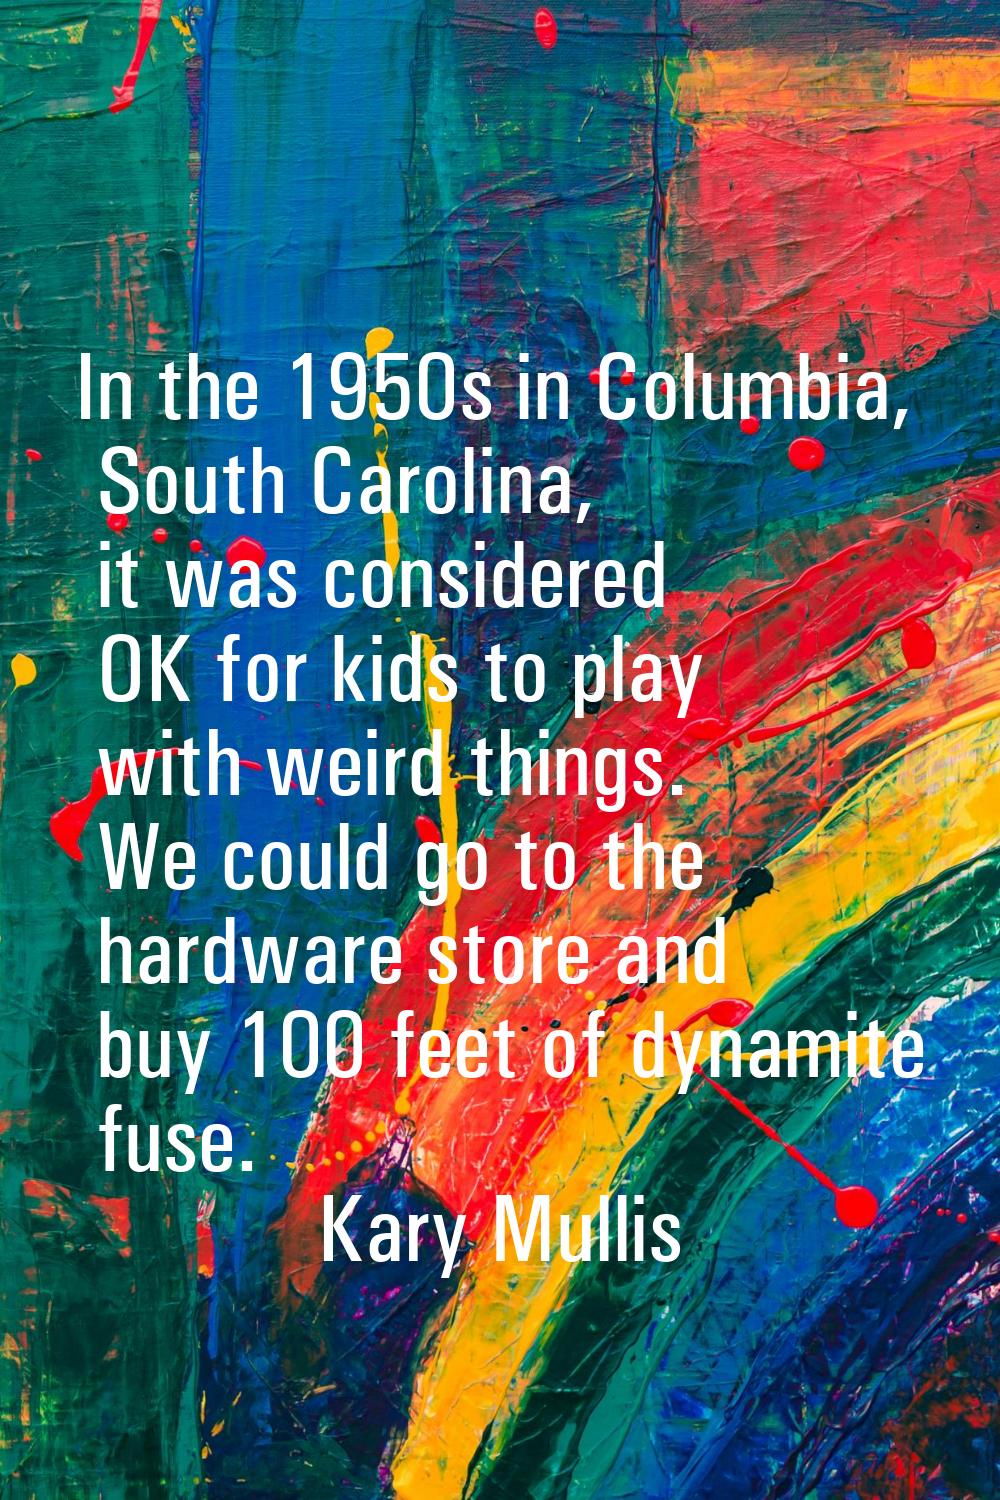 In the 1950s in Columbia, South Carolina, it was considered OK for kids to play with weird things. 